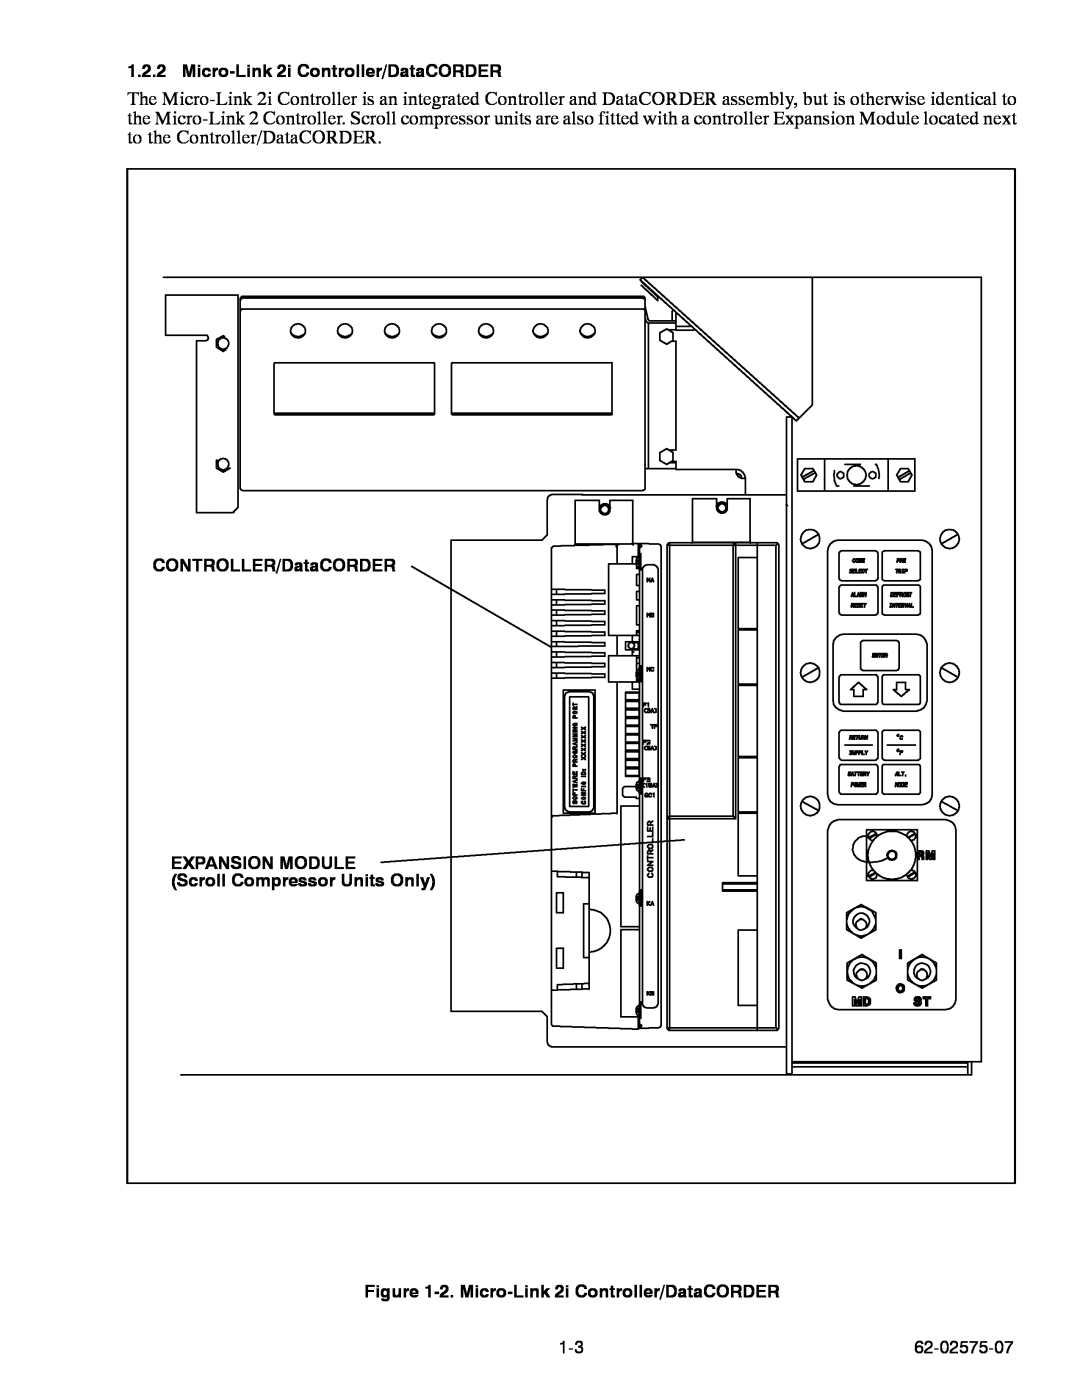 Carrier Container Refrigeration Unit manual Micro-Link 2i Controller/DataCORDER, CONTROLLER/DataCORDER, Expansion Module 